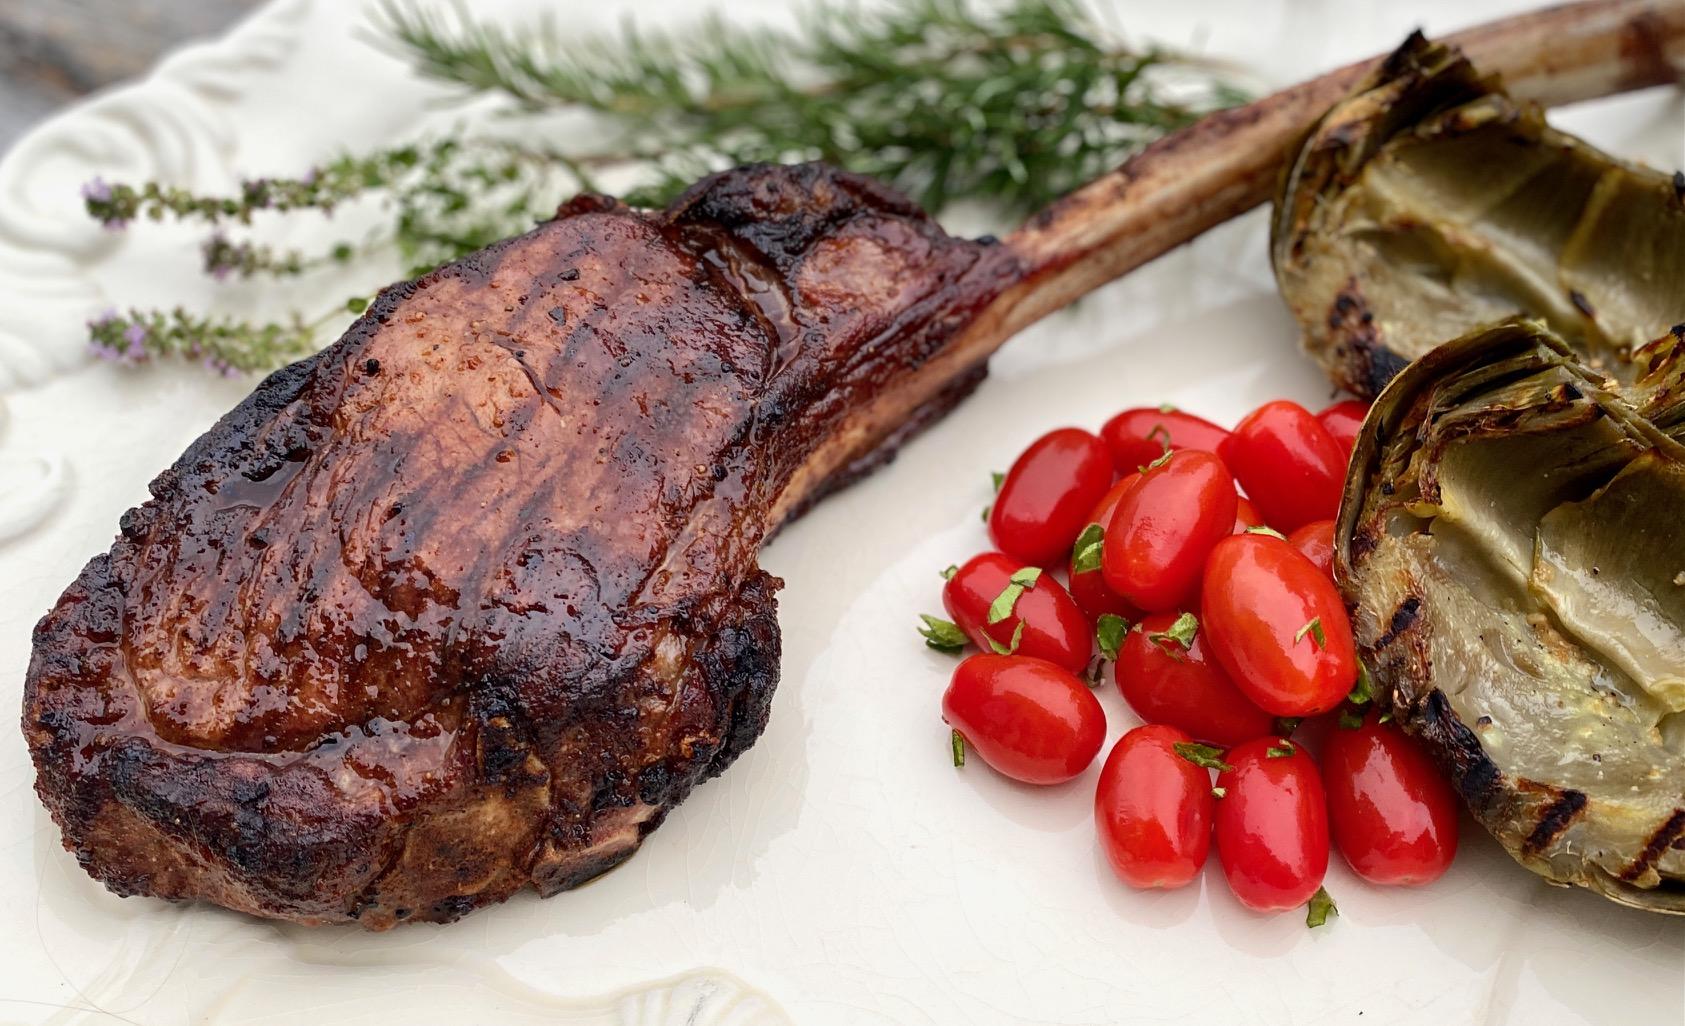 Grilled steak with rosemary and tomatoes